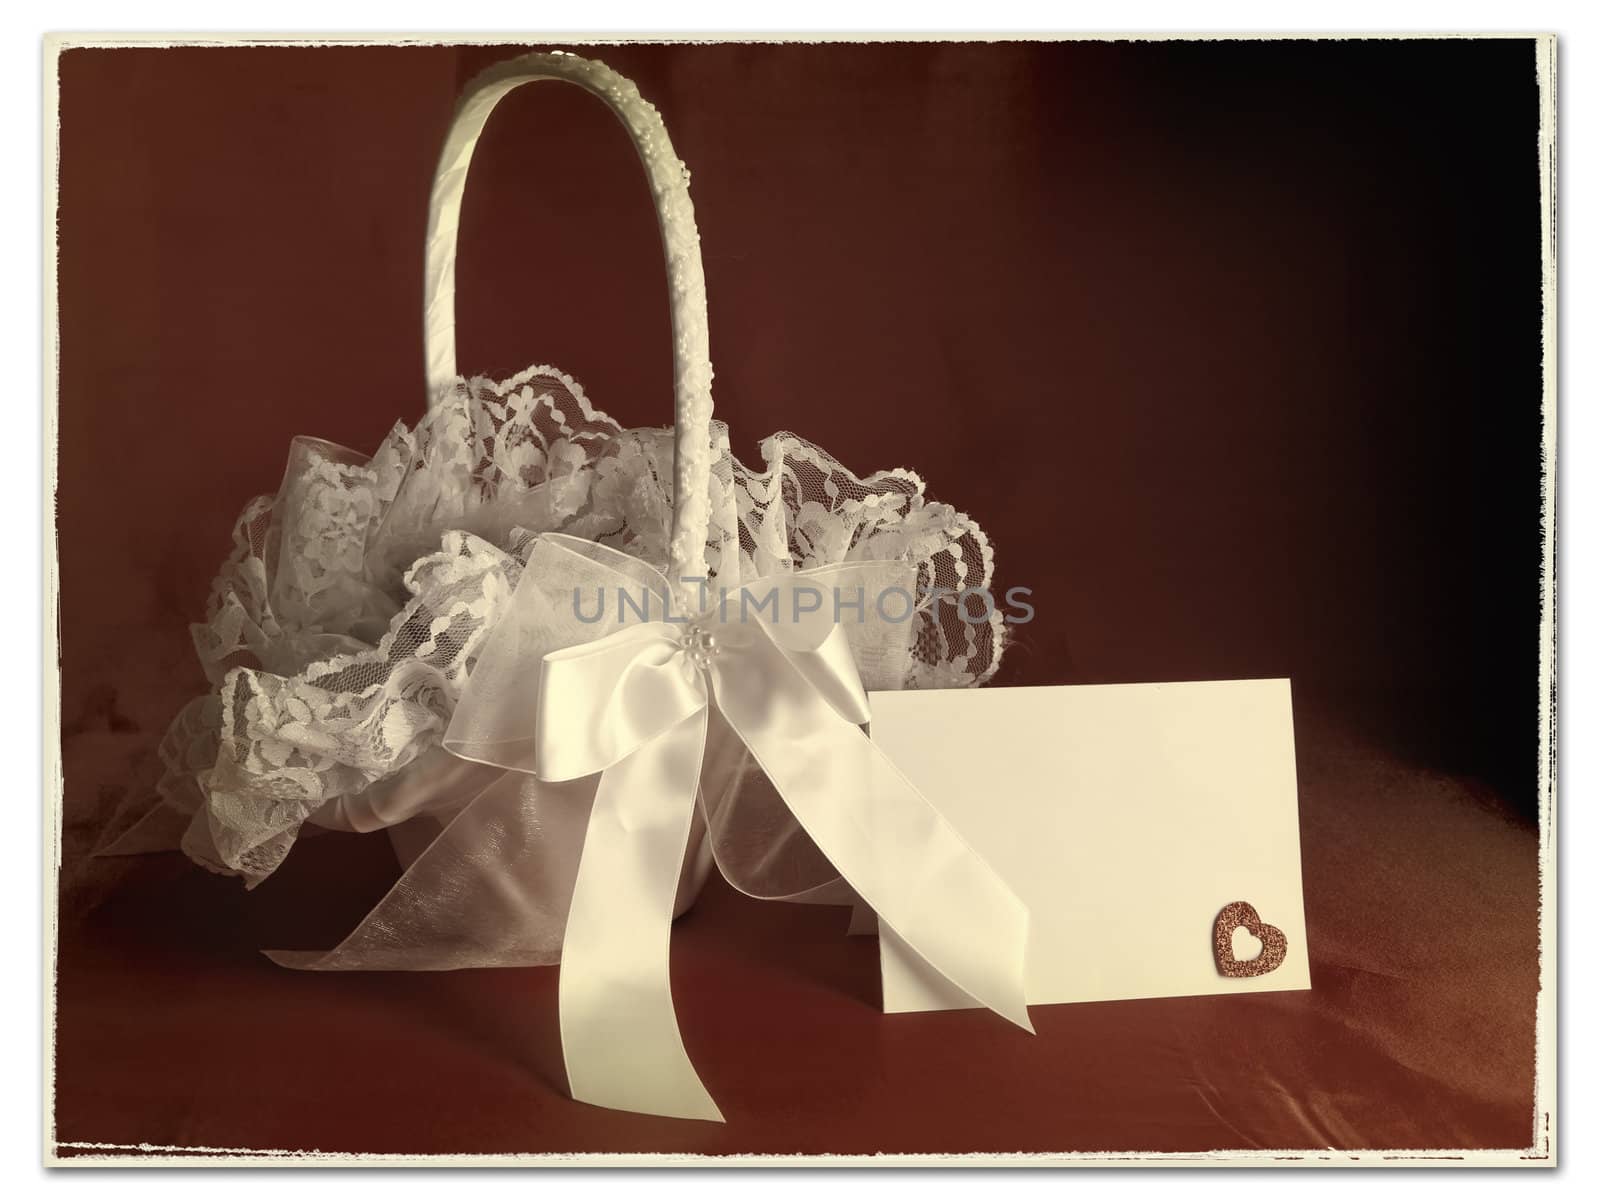 Old (stylized) image of bridal flower basket with invitation card